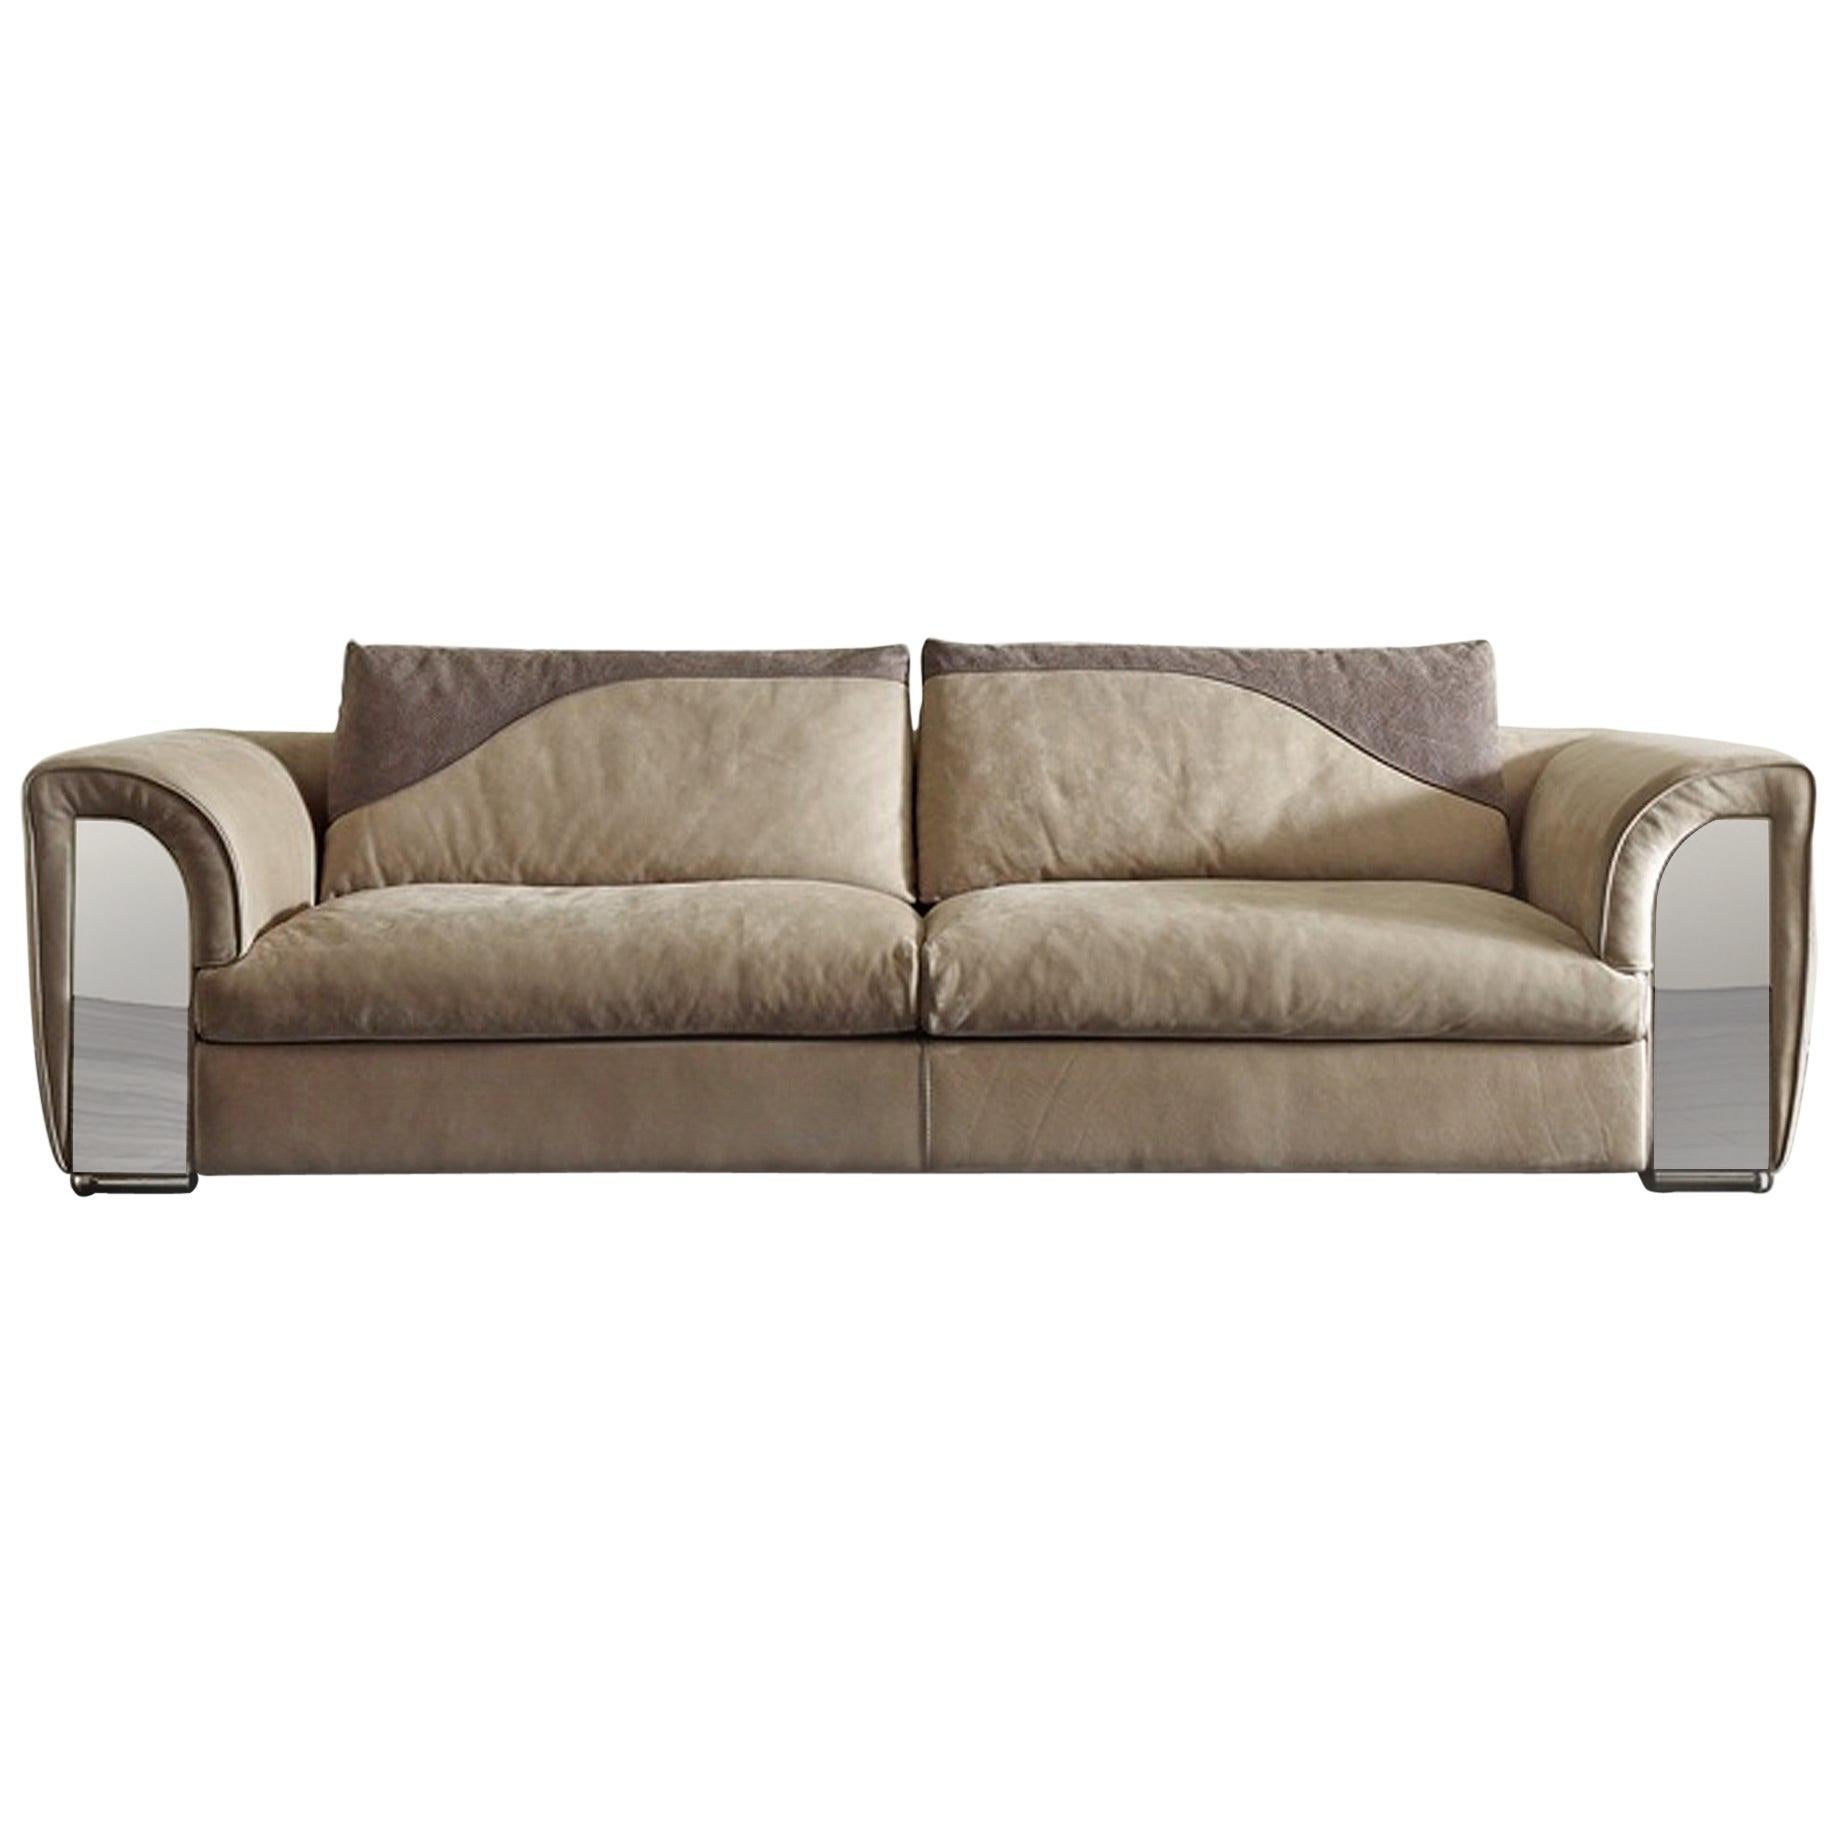 Atlanta Sofa with Leather and Shiny Steel Details